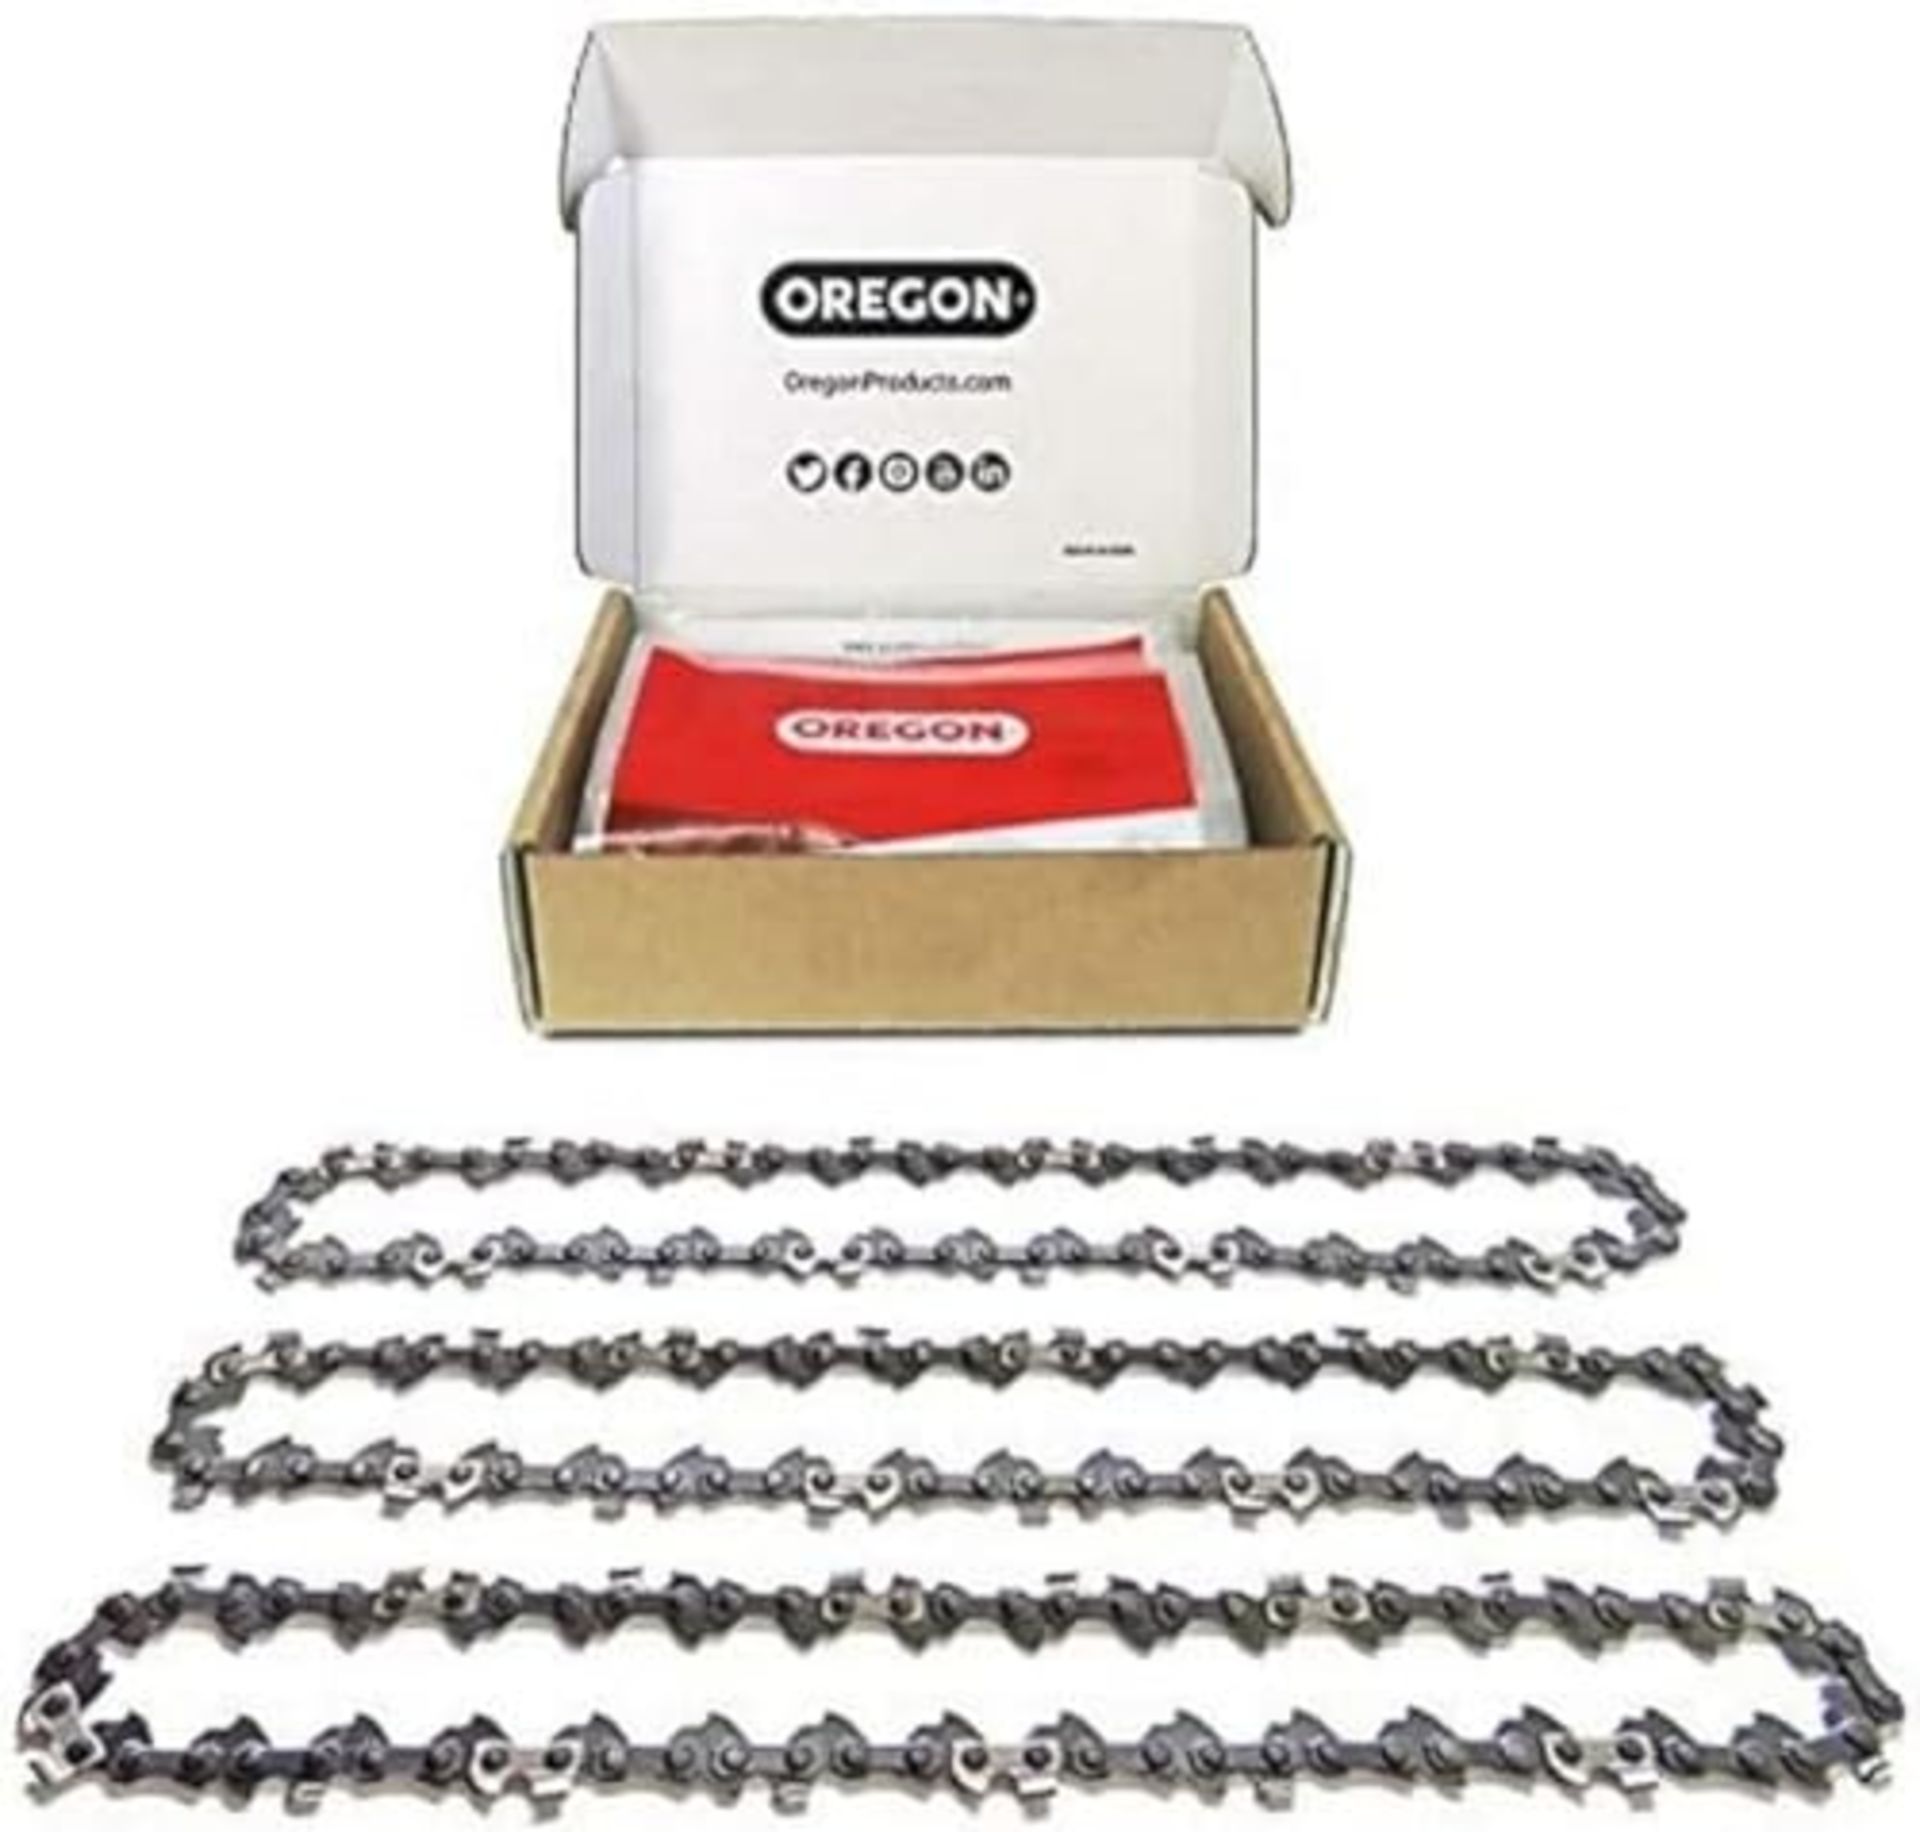 Oregon 3-Pack Chainsaw Chain for 14-Inch (35 cm) Bar -52 Drive Links  low-kickback